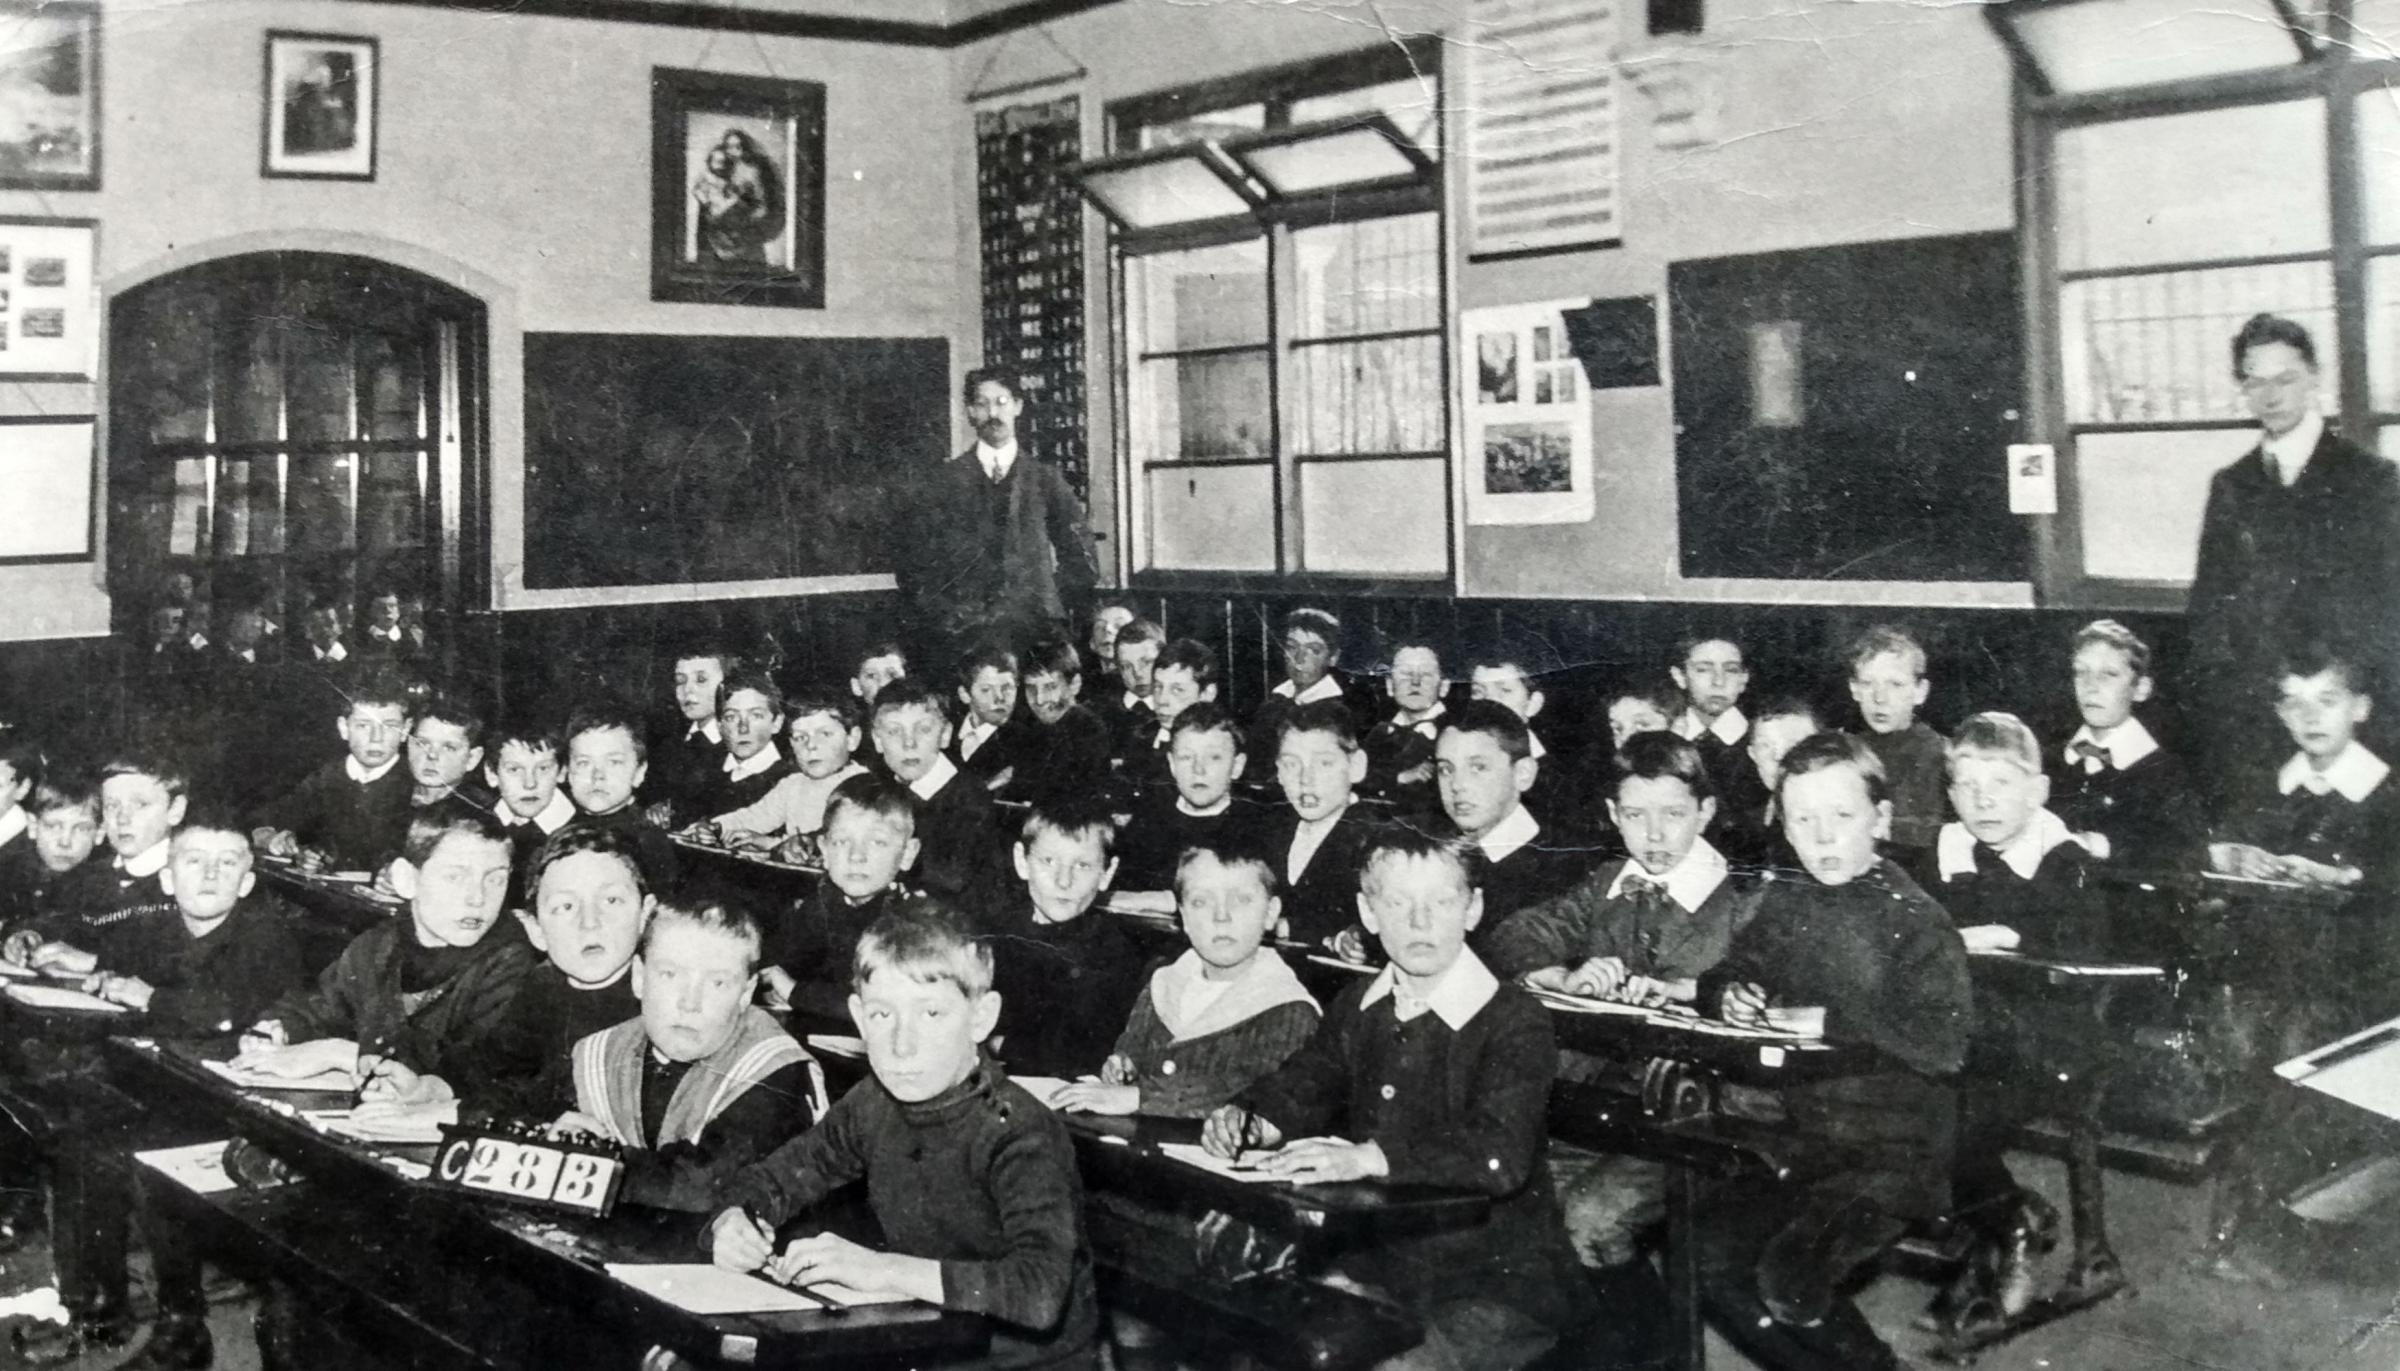 It’s 1912 and Rainbow Hill Junior School pupils gather in classroom 10, so it must have been a sizeable establishment